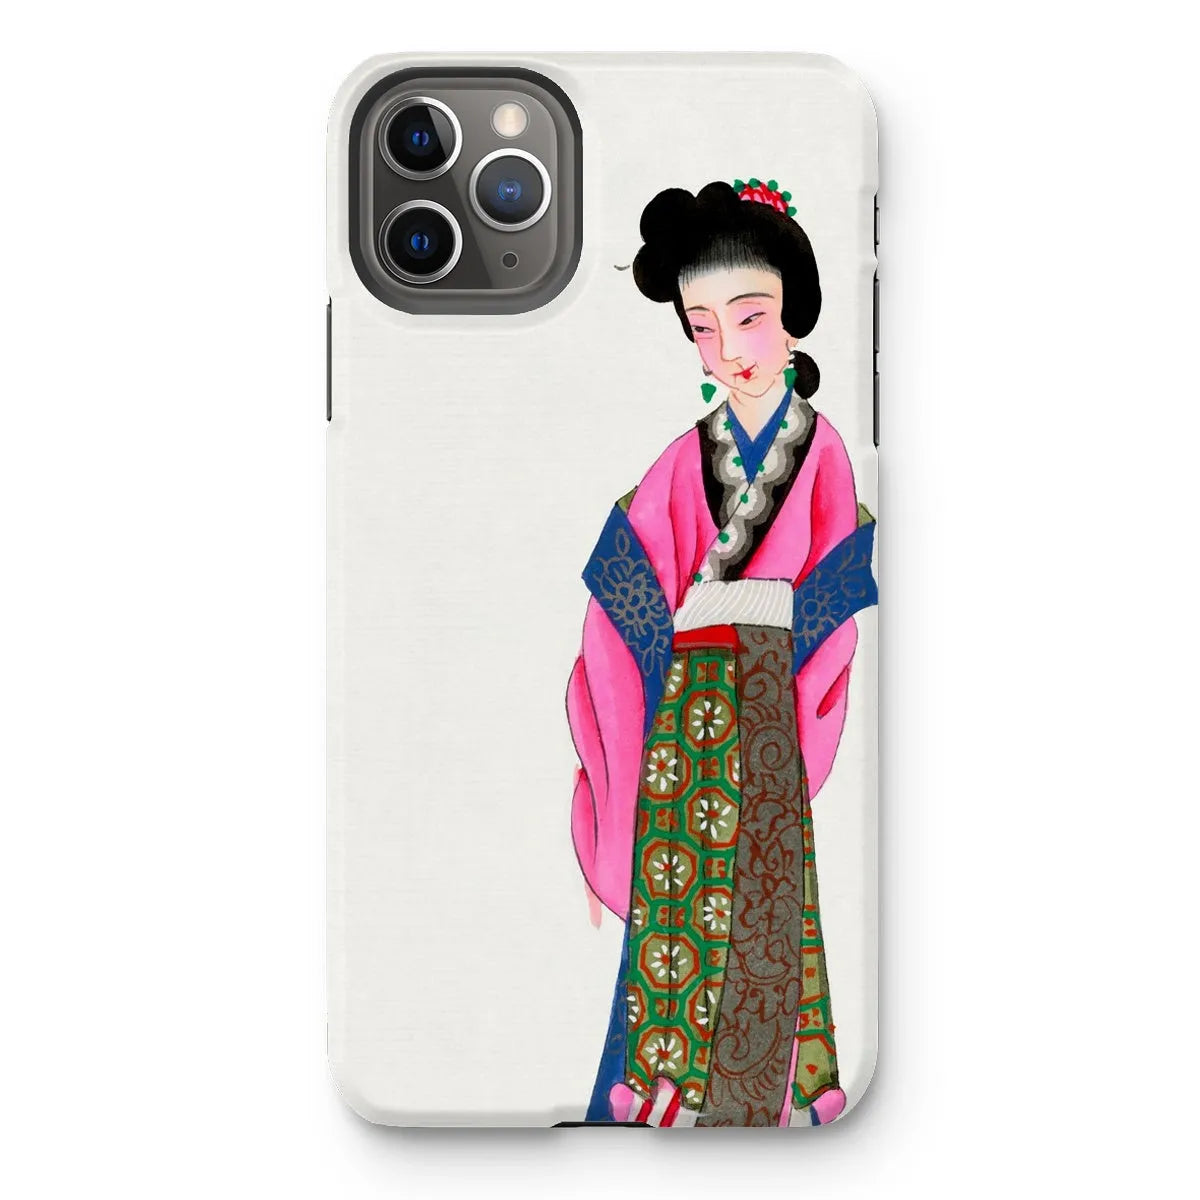 Noblewoman - Chinese Aesthetic Manchu Art Phone Case - Iphone 11 Pro Max / Matte - Mobile Phone Cases - Aesthetic Art